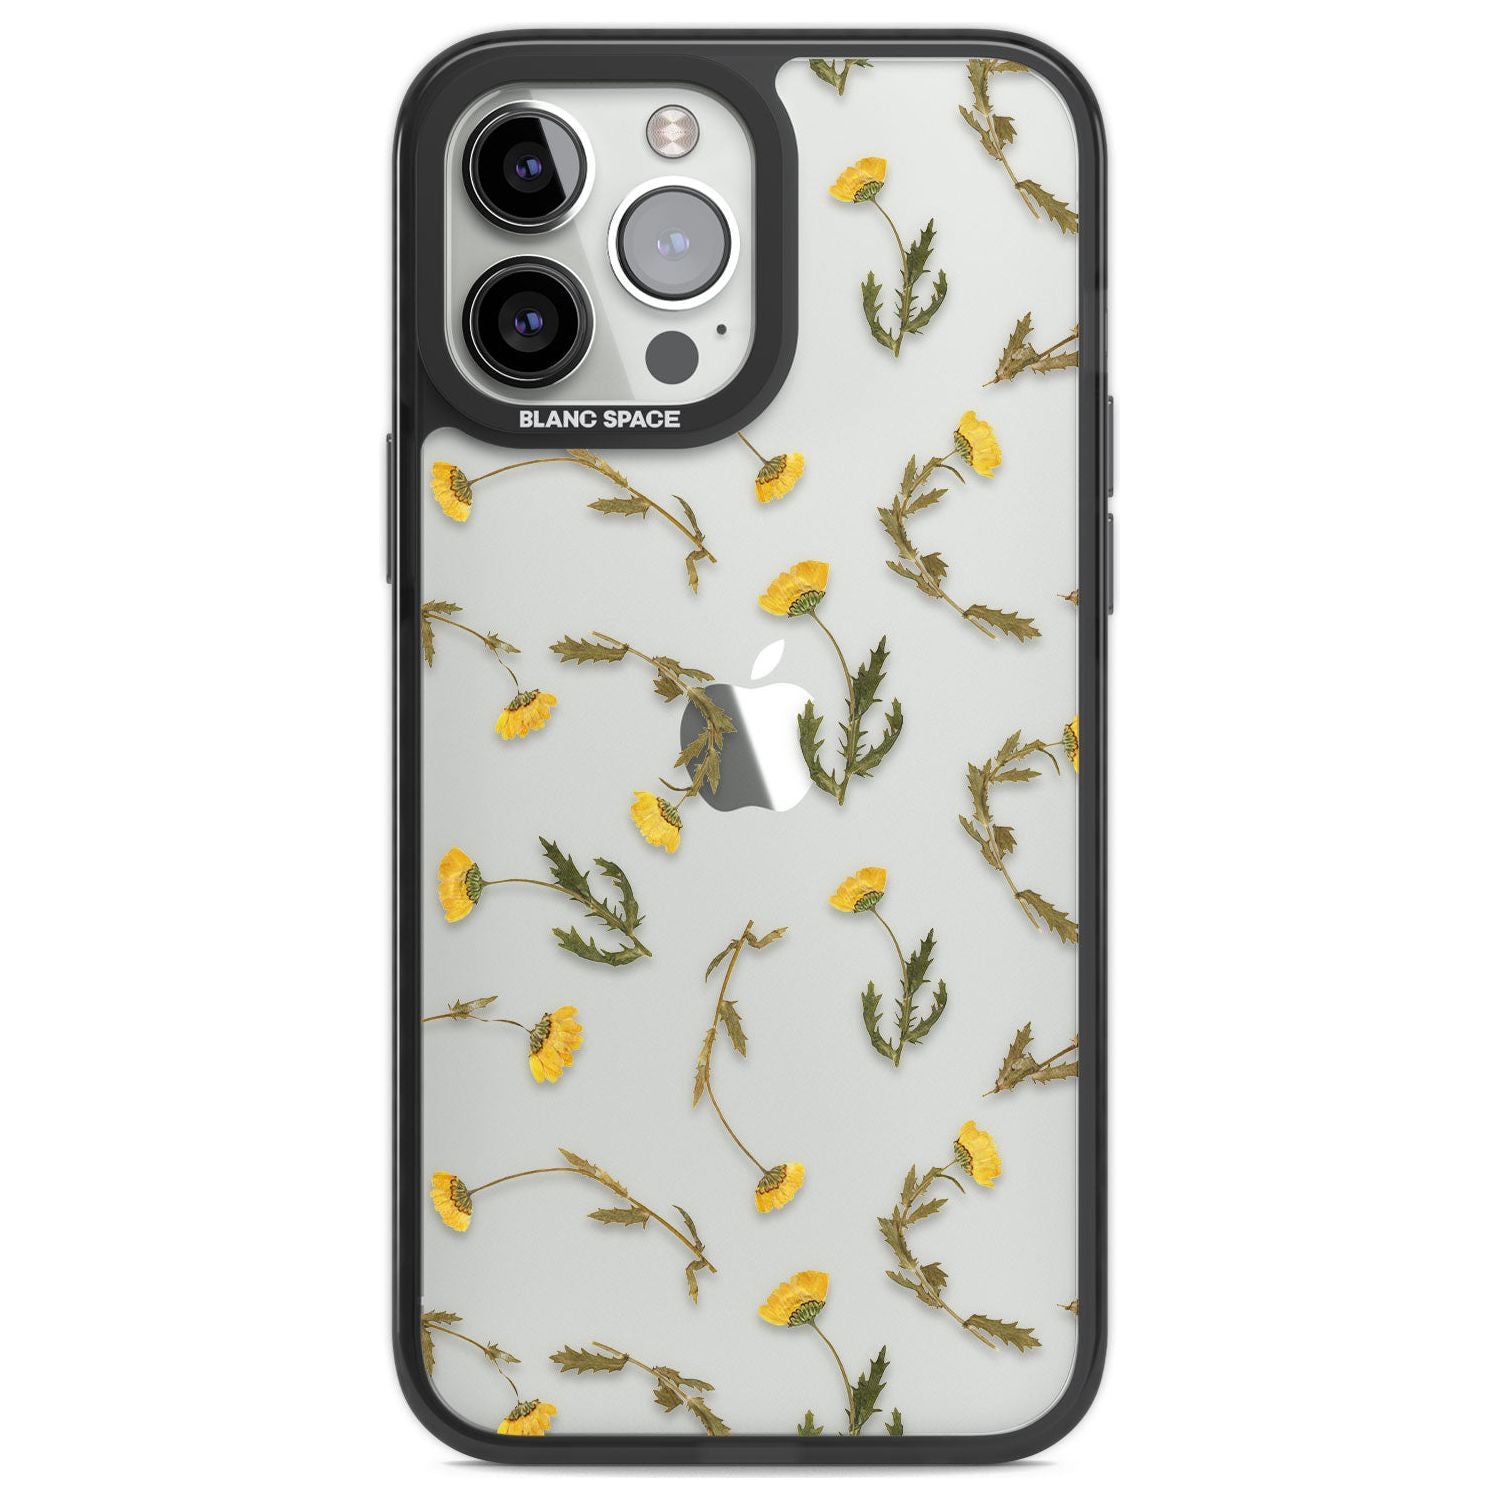 Long Stemmed Wildflowers - Dried Flower-Inspired Phone Case iPhone 13 Pro Max / Black Impact Case,iPhone 14 Pro Max / Black Impact Case Blanc Space